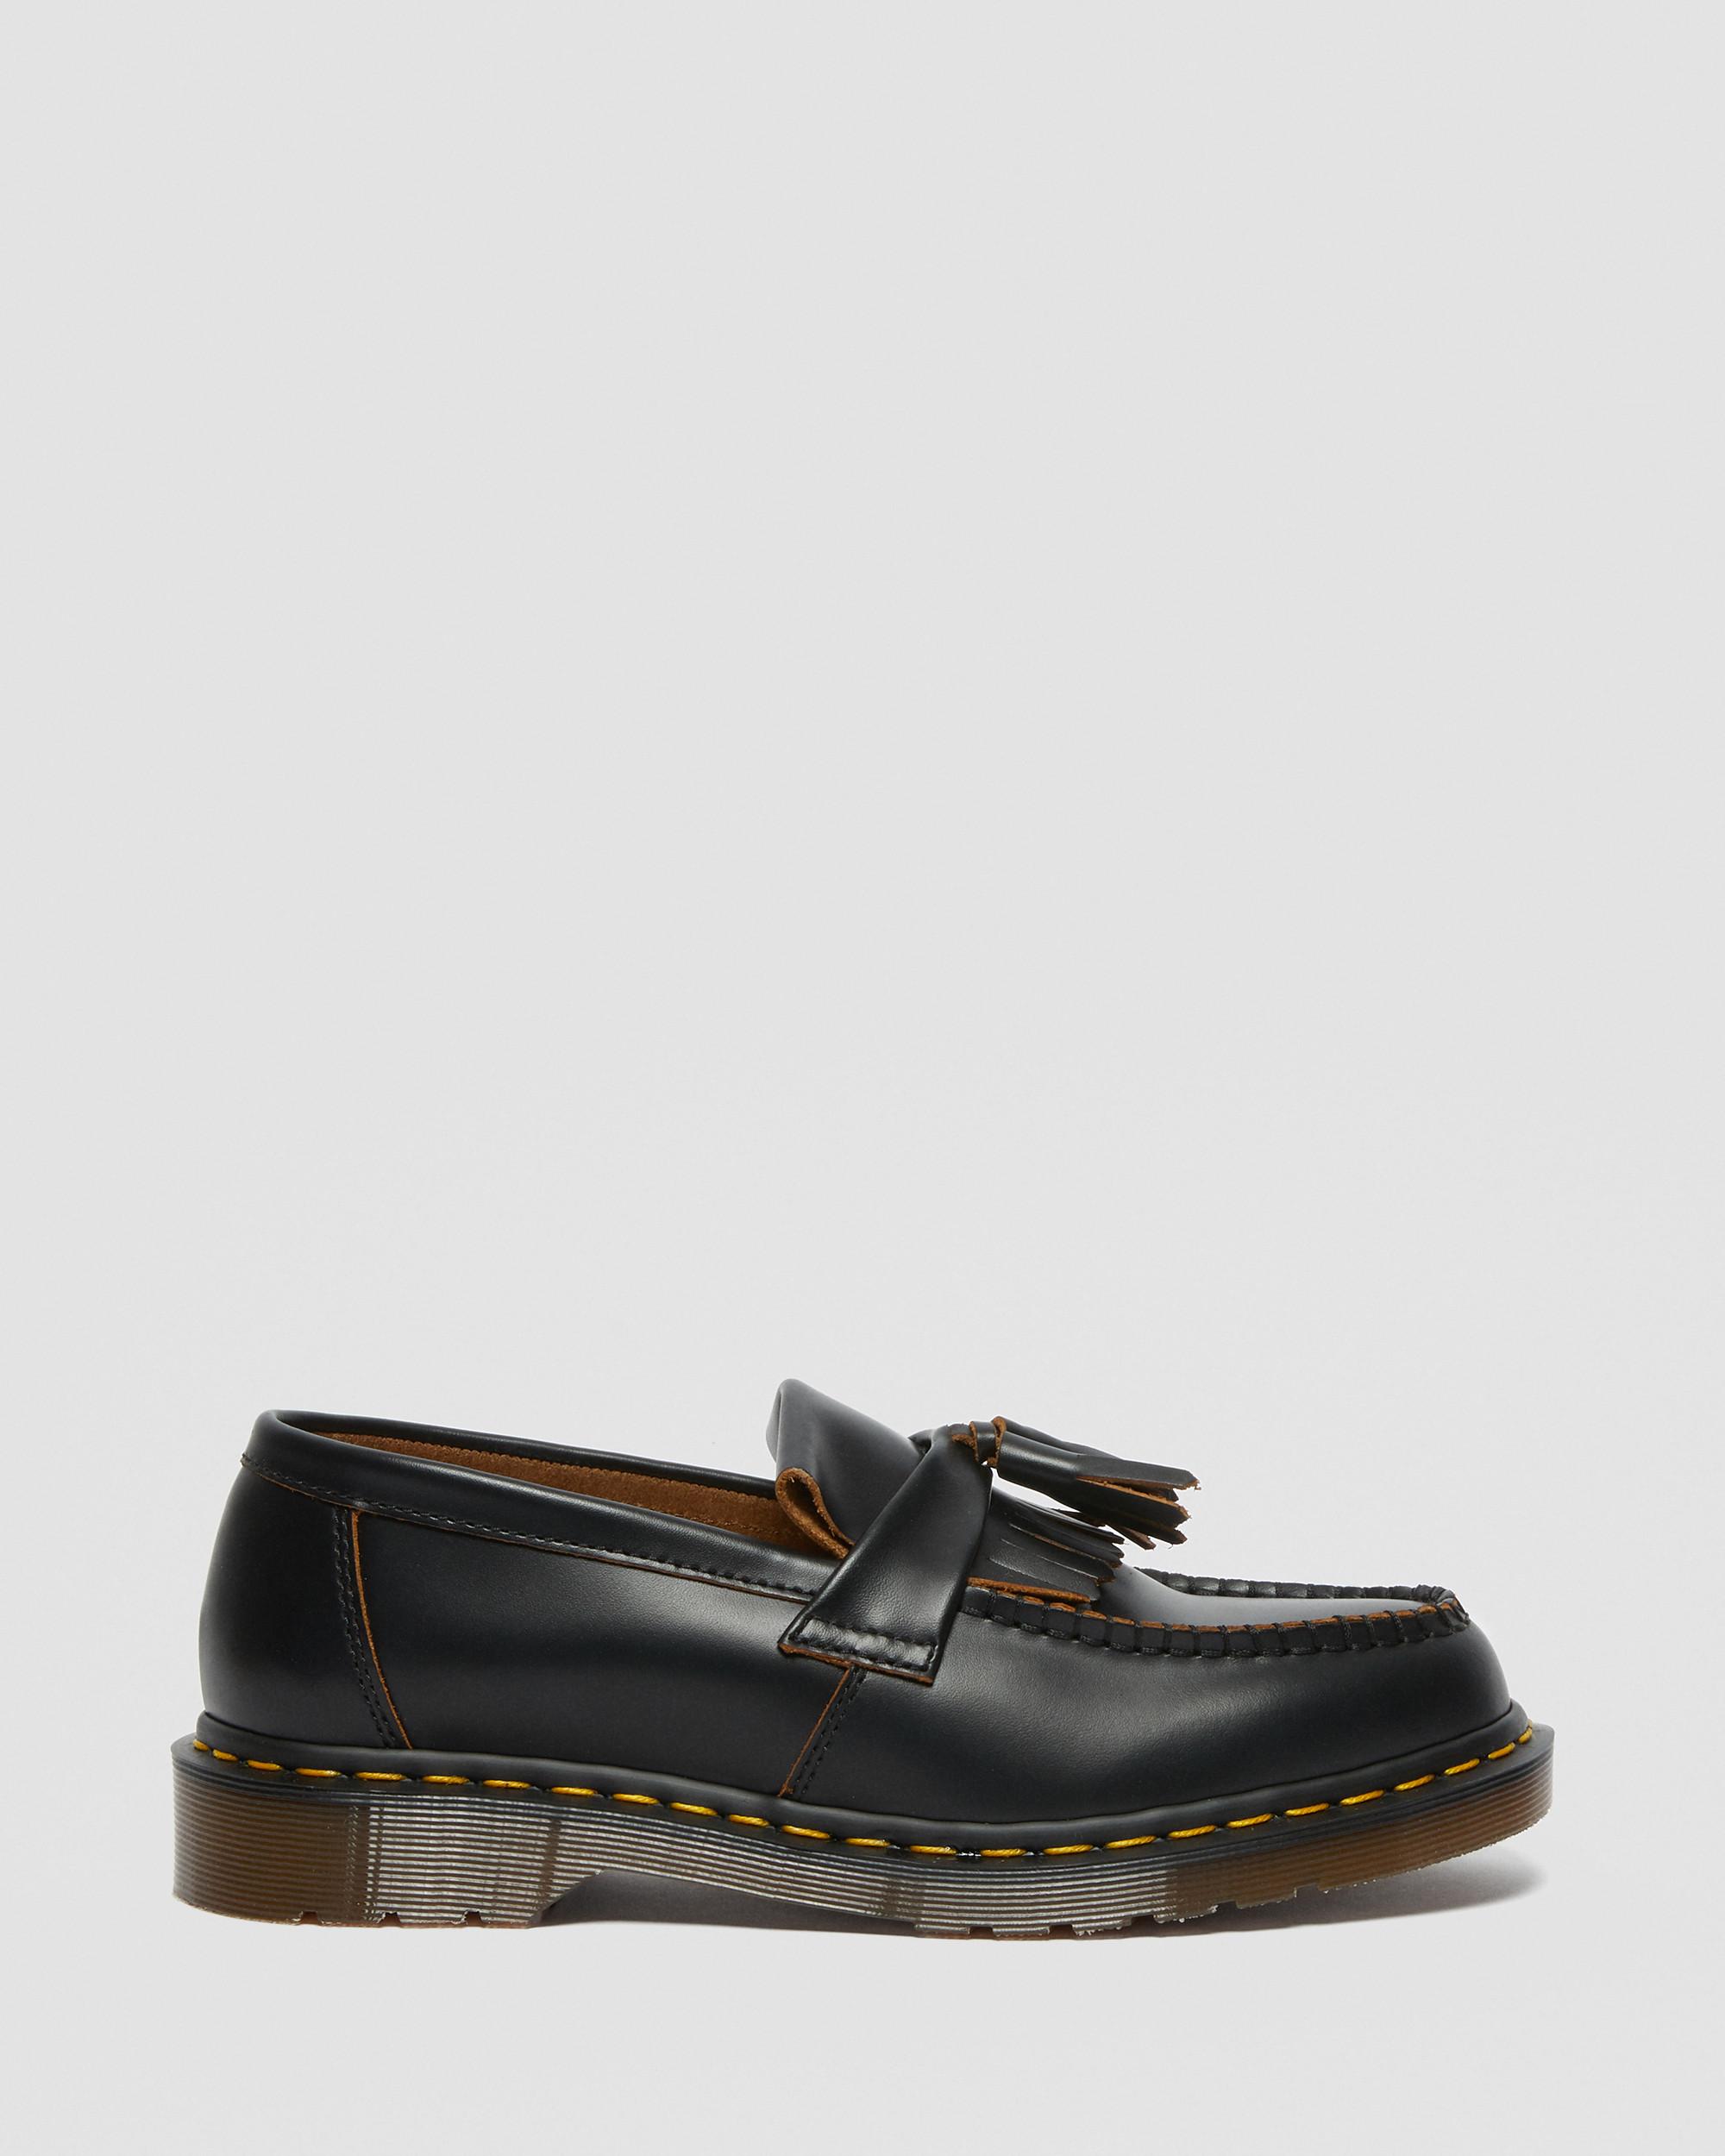 Adrian Made in England Vintage Leather Tassel Loafers | Dr. Martens